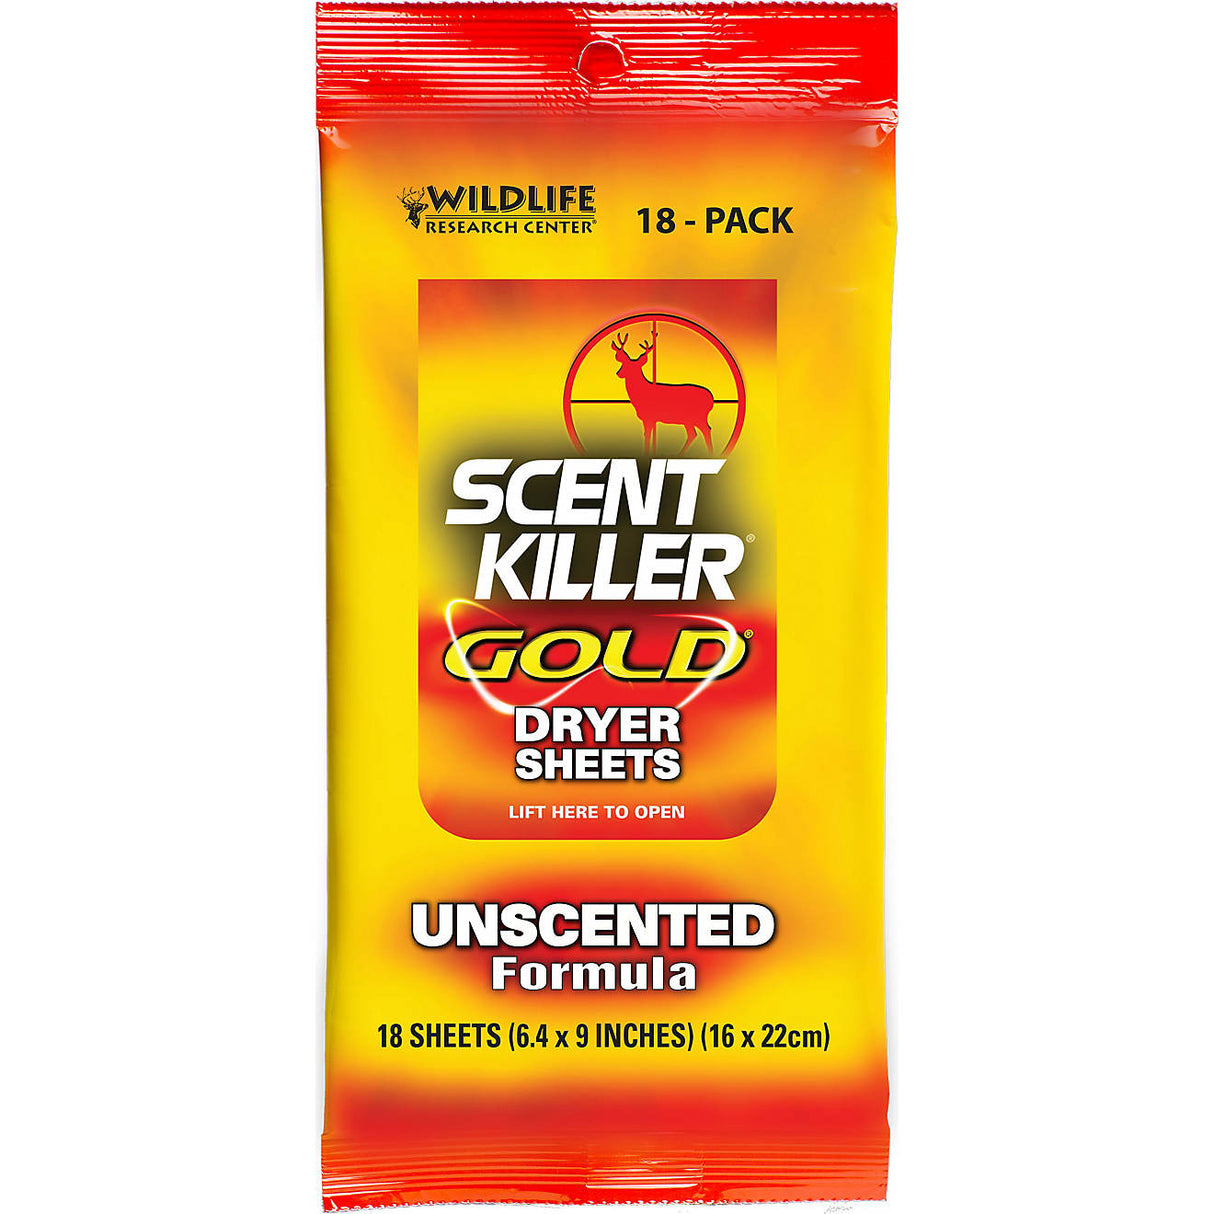 Wildlife Research Center Scent Killer Gold Unscented Dryer Sheets 18-Pack